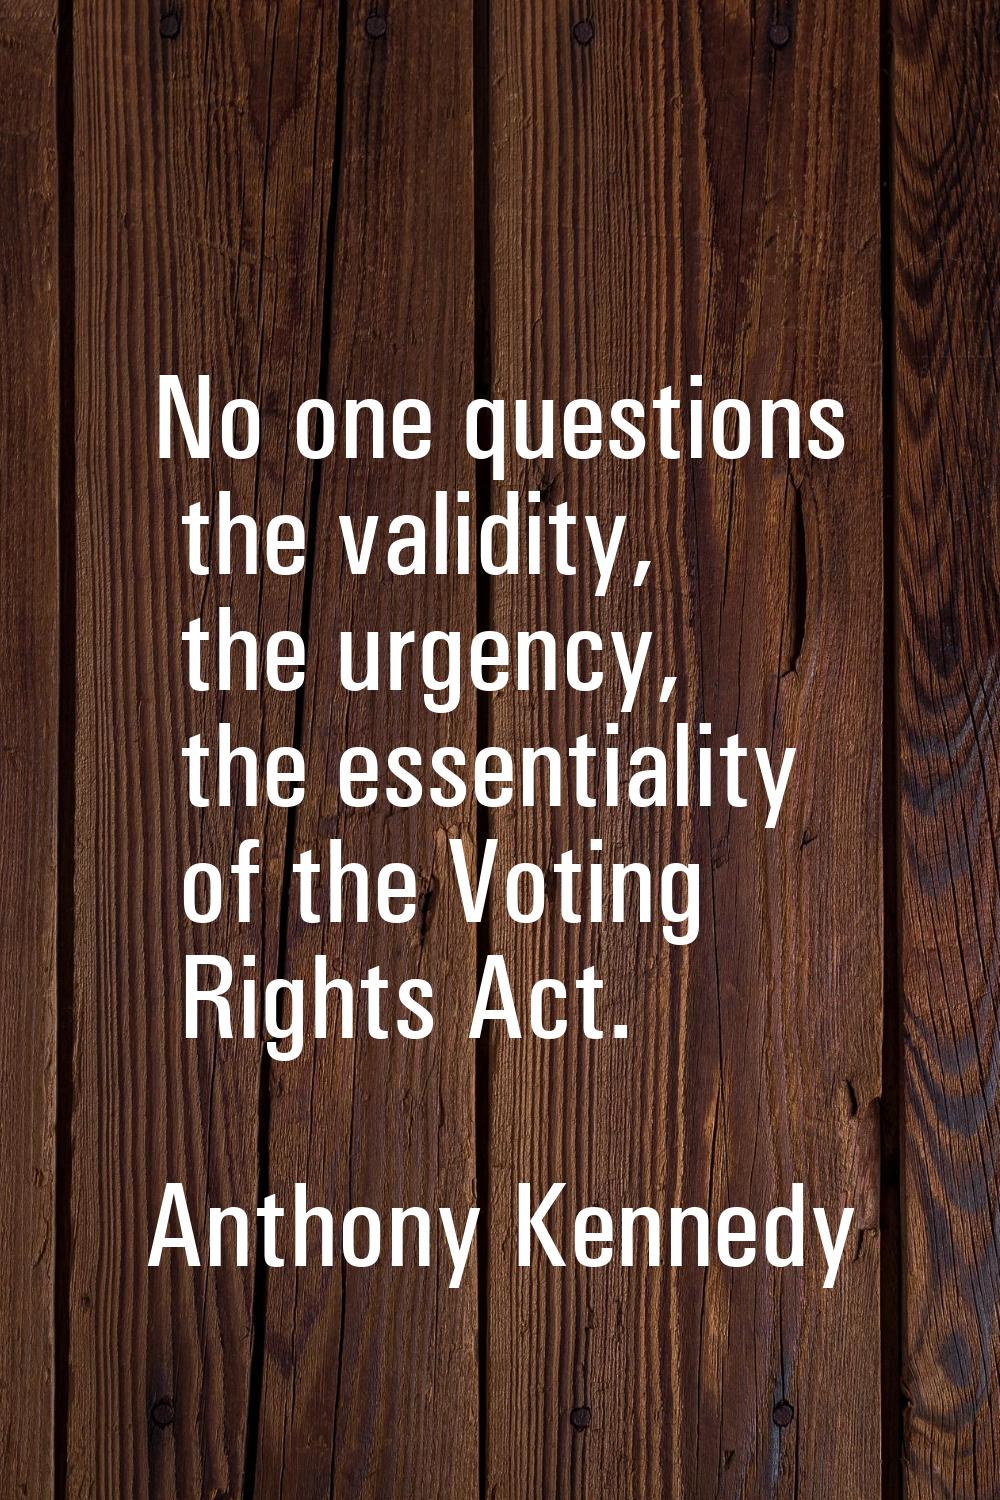 No one questions the validity, the urgency, the essentiality of the Voting Rights Act.